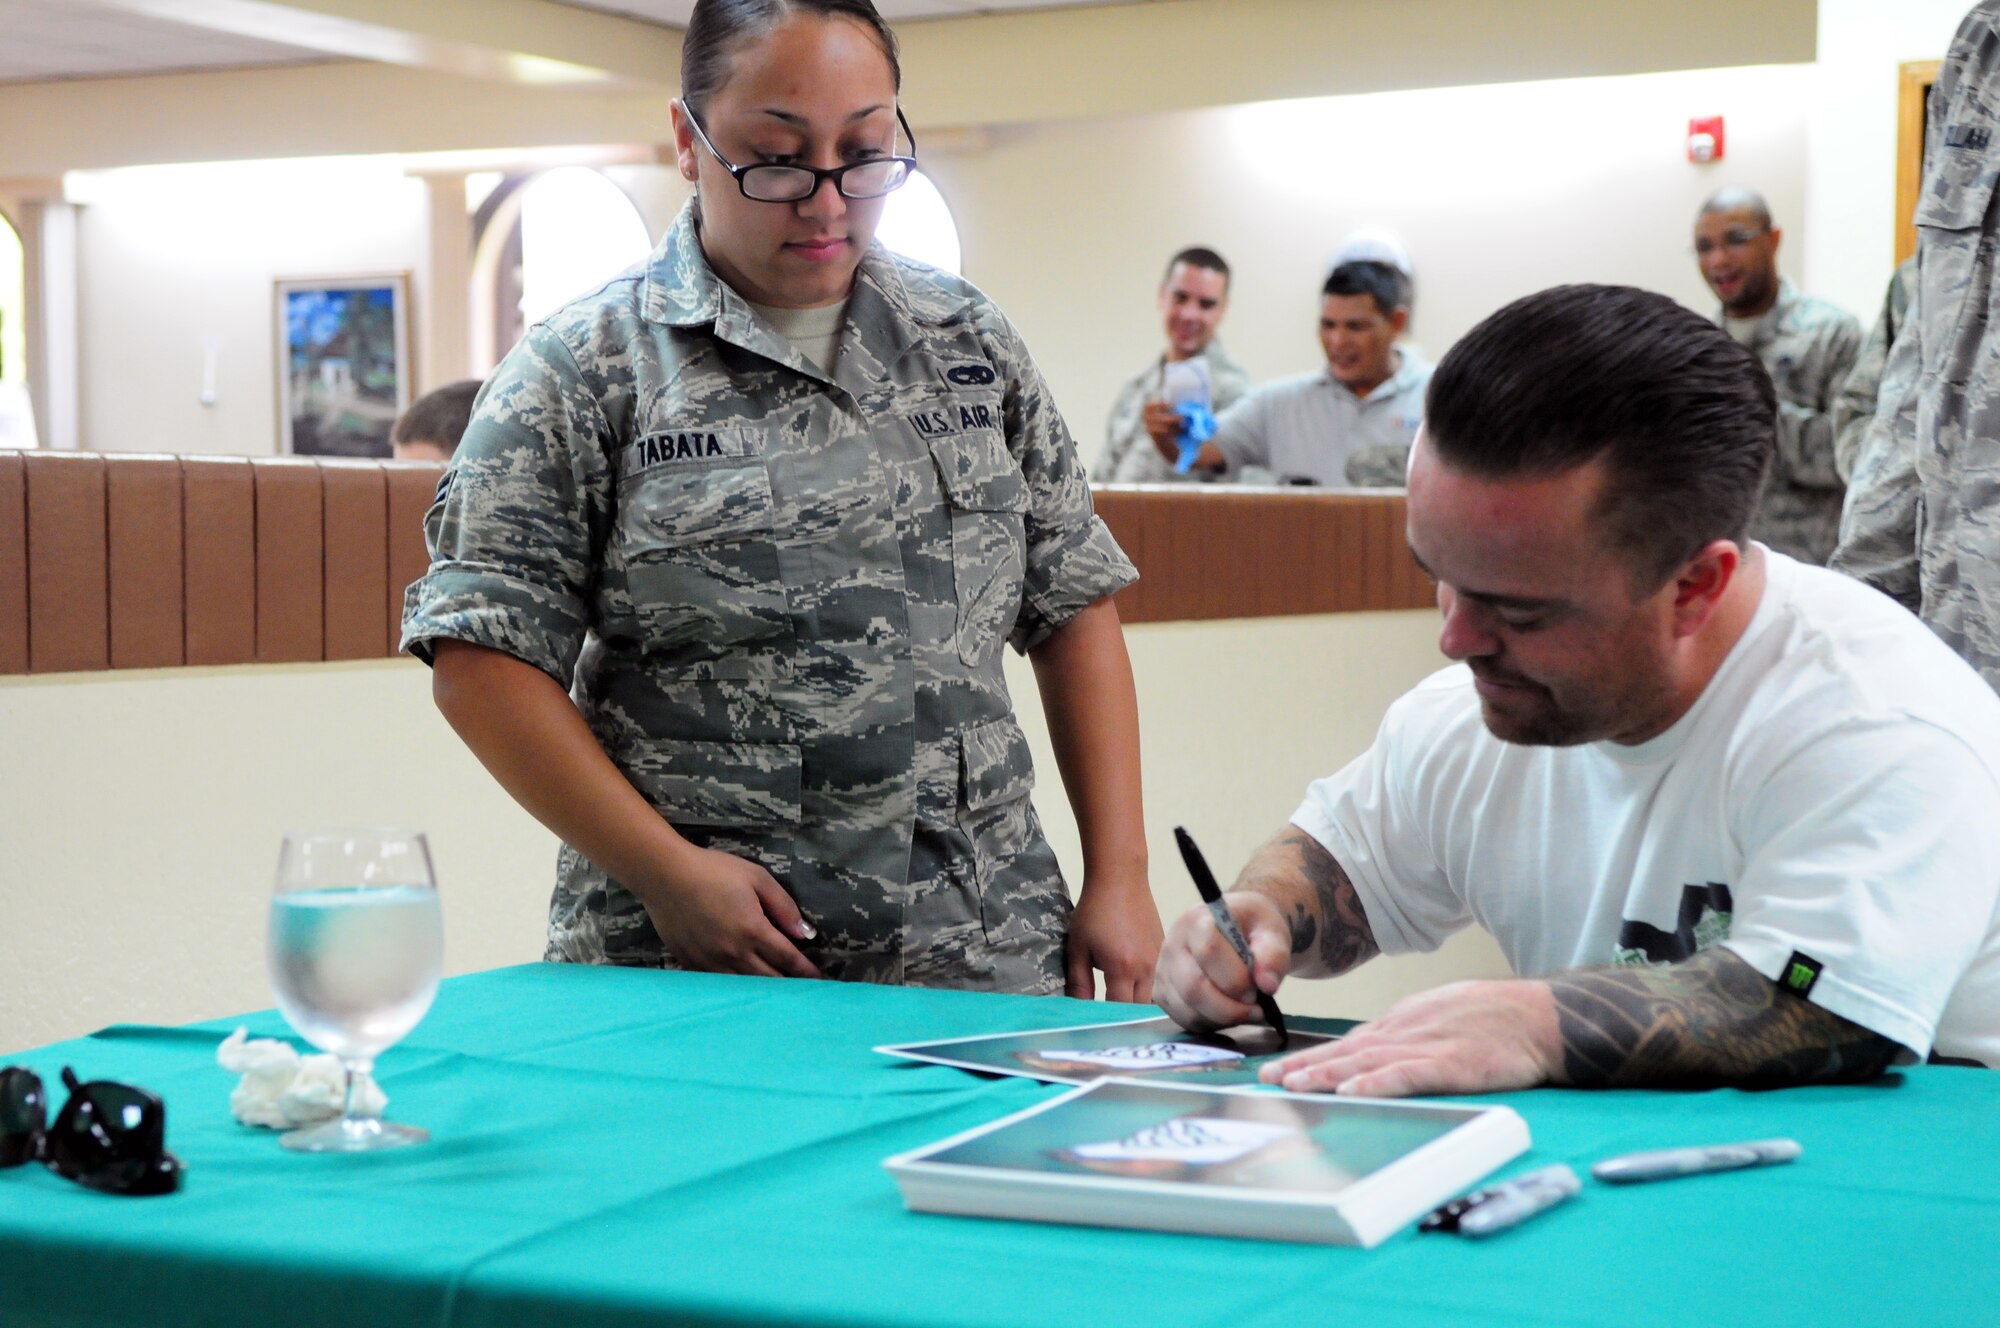 Actor Jason “Wee Man” Acuña signs an autograph for Airman 1st Class Kealahni Tabata, 36th Munitions Squadron, at the Magellan Inn Dining Facility on Andersen Air Force Base, Guam, Jan. 9. Wee Man Signed autographs, raffled prizes, conducted a skateboard demonstration and previewed his newest movie for Airmen and family members at Andersen as part of his Wee Man Salutes the Service tour. (U.S. Air Force photo by Senior Airman Robert Hicks/Released)